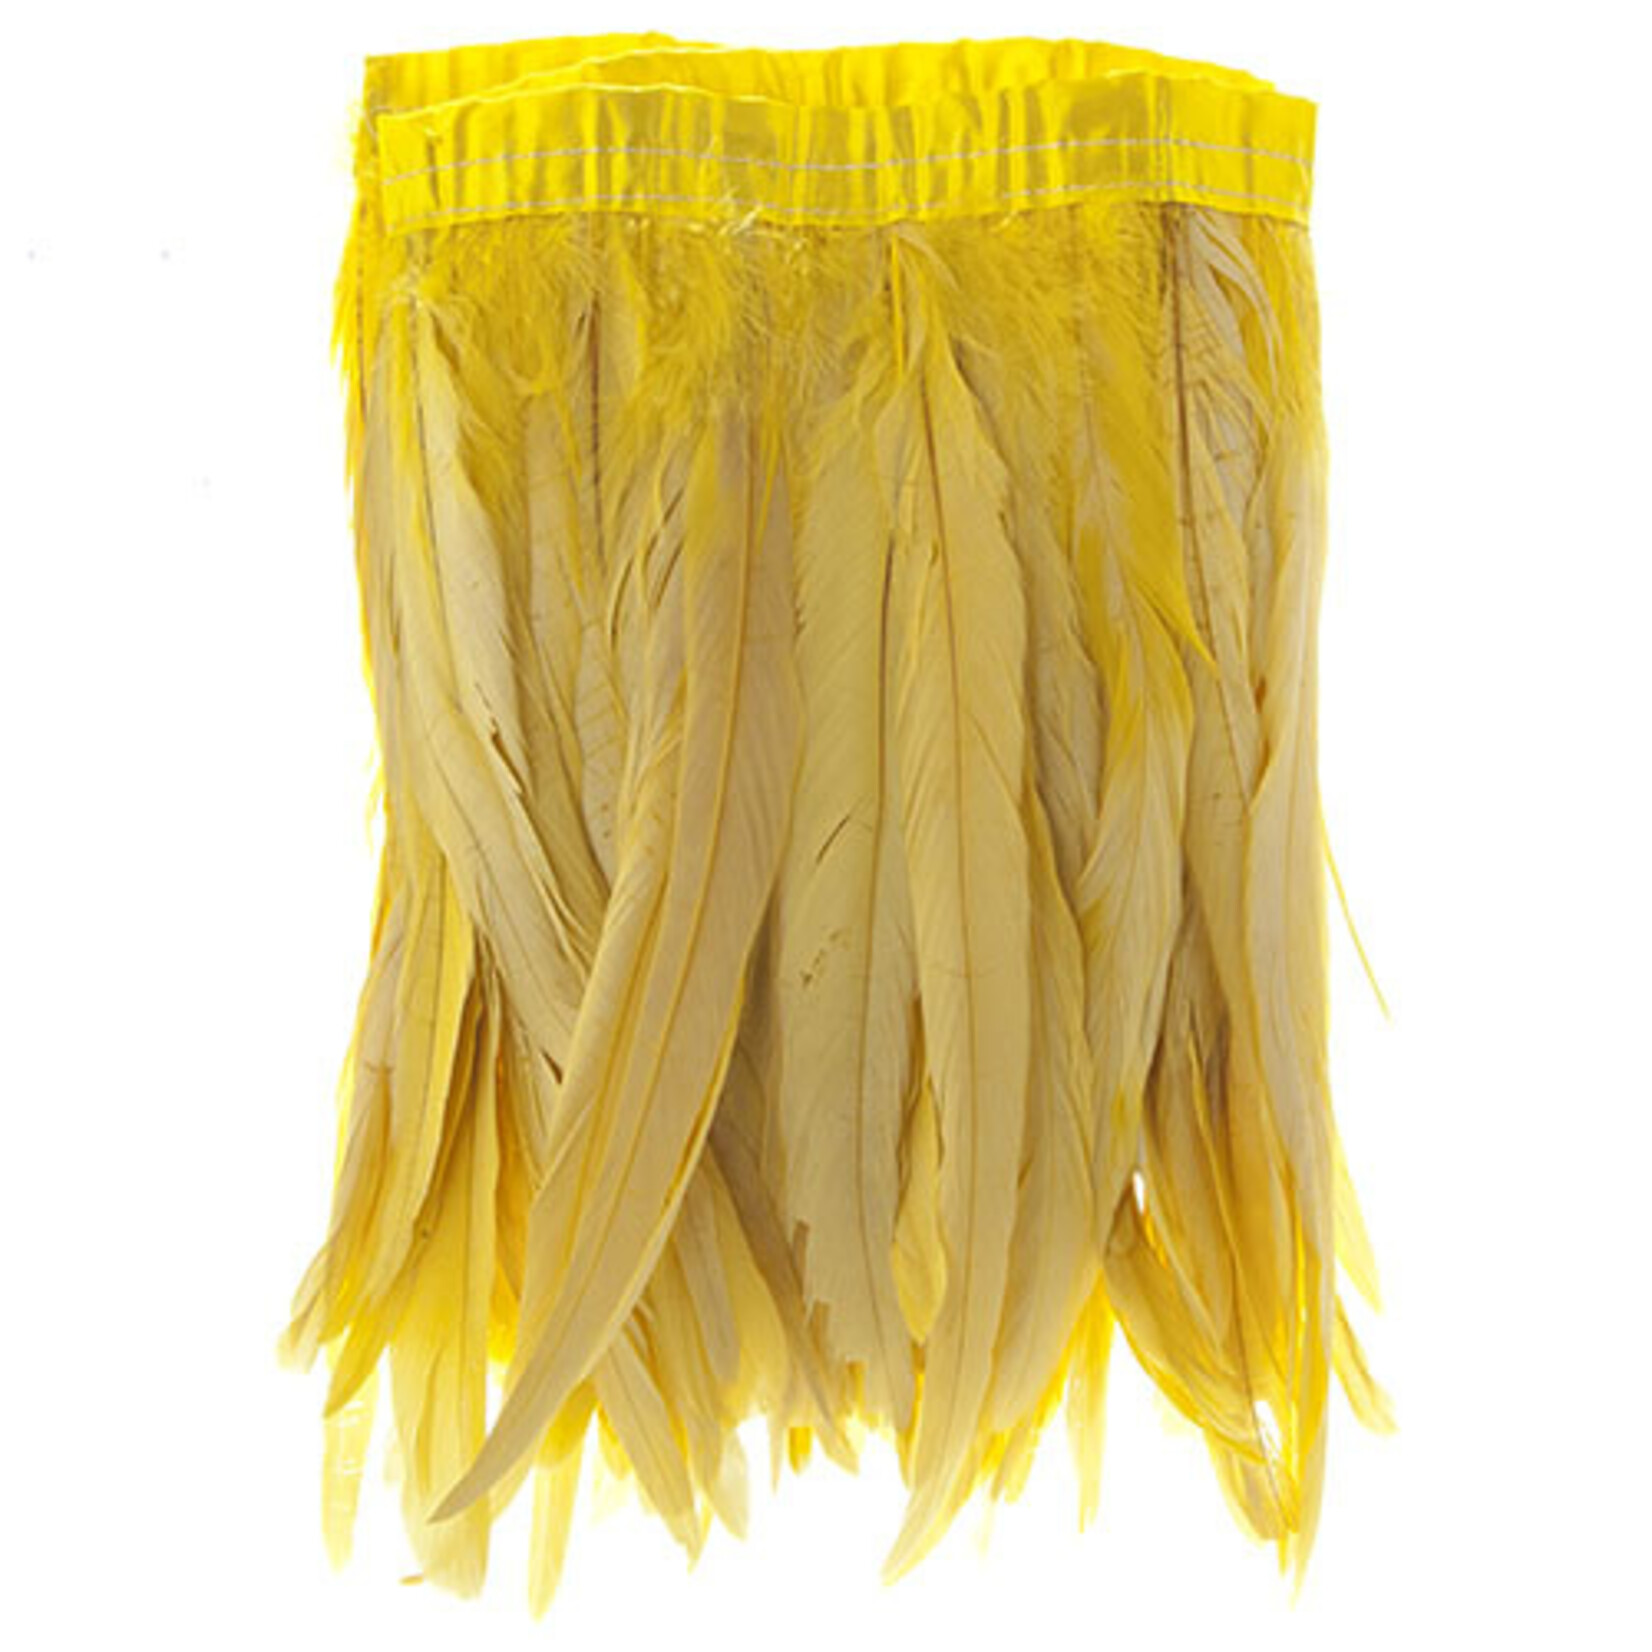 Coque Feathers Value 12-14 Inches Lemon